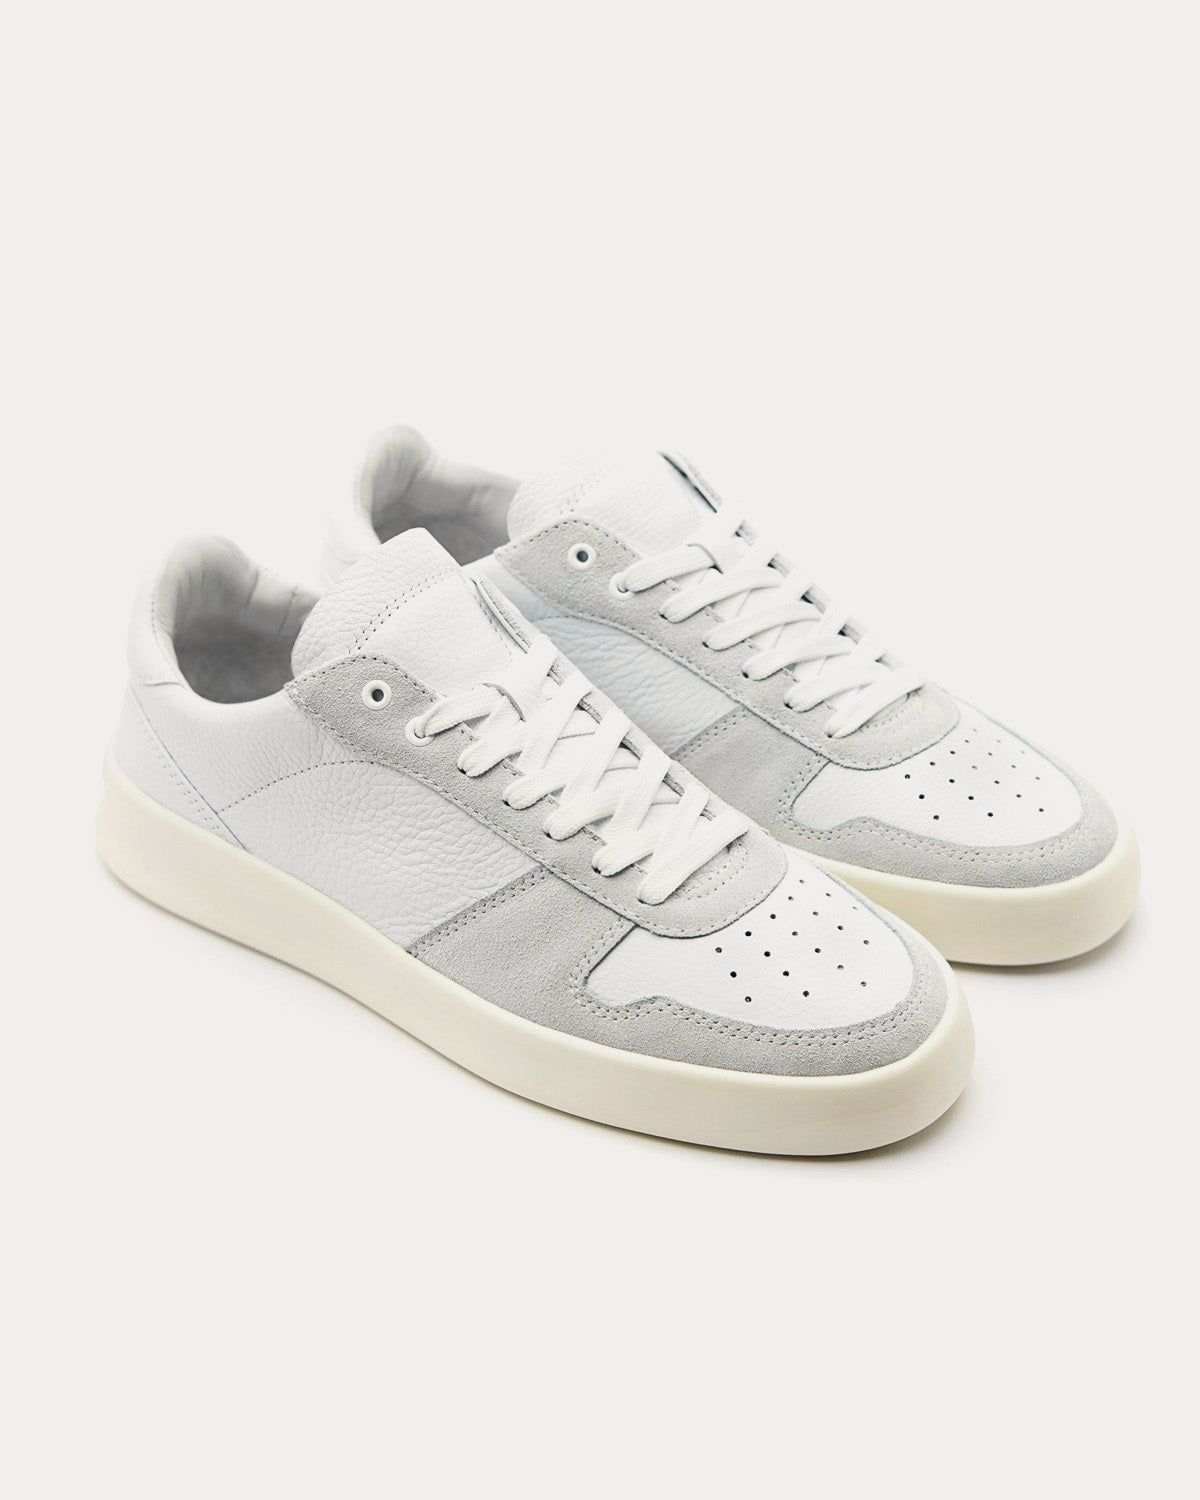 Vor - 5A CHAMPAGNERWEISS White Low Top Sneakers